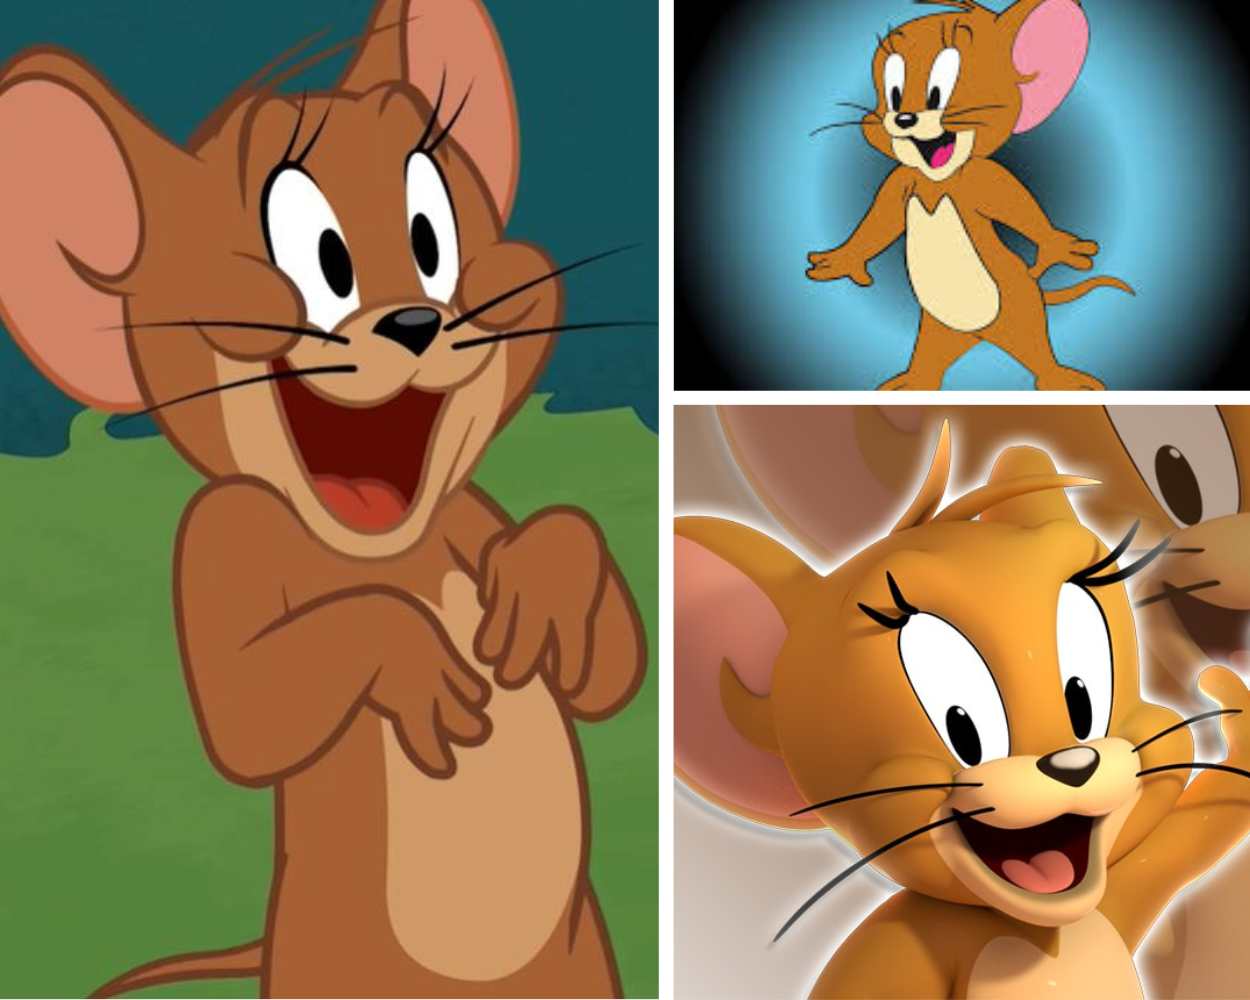 Jerry Mouse characters with big eyes